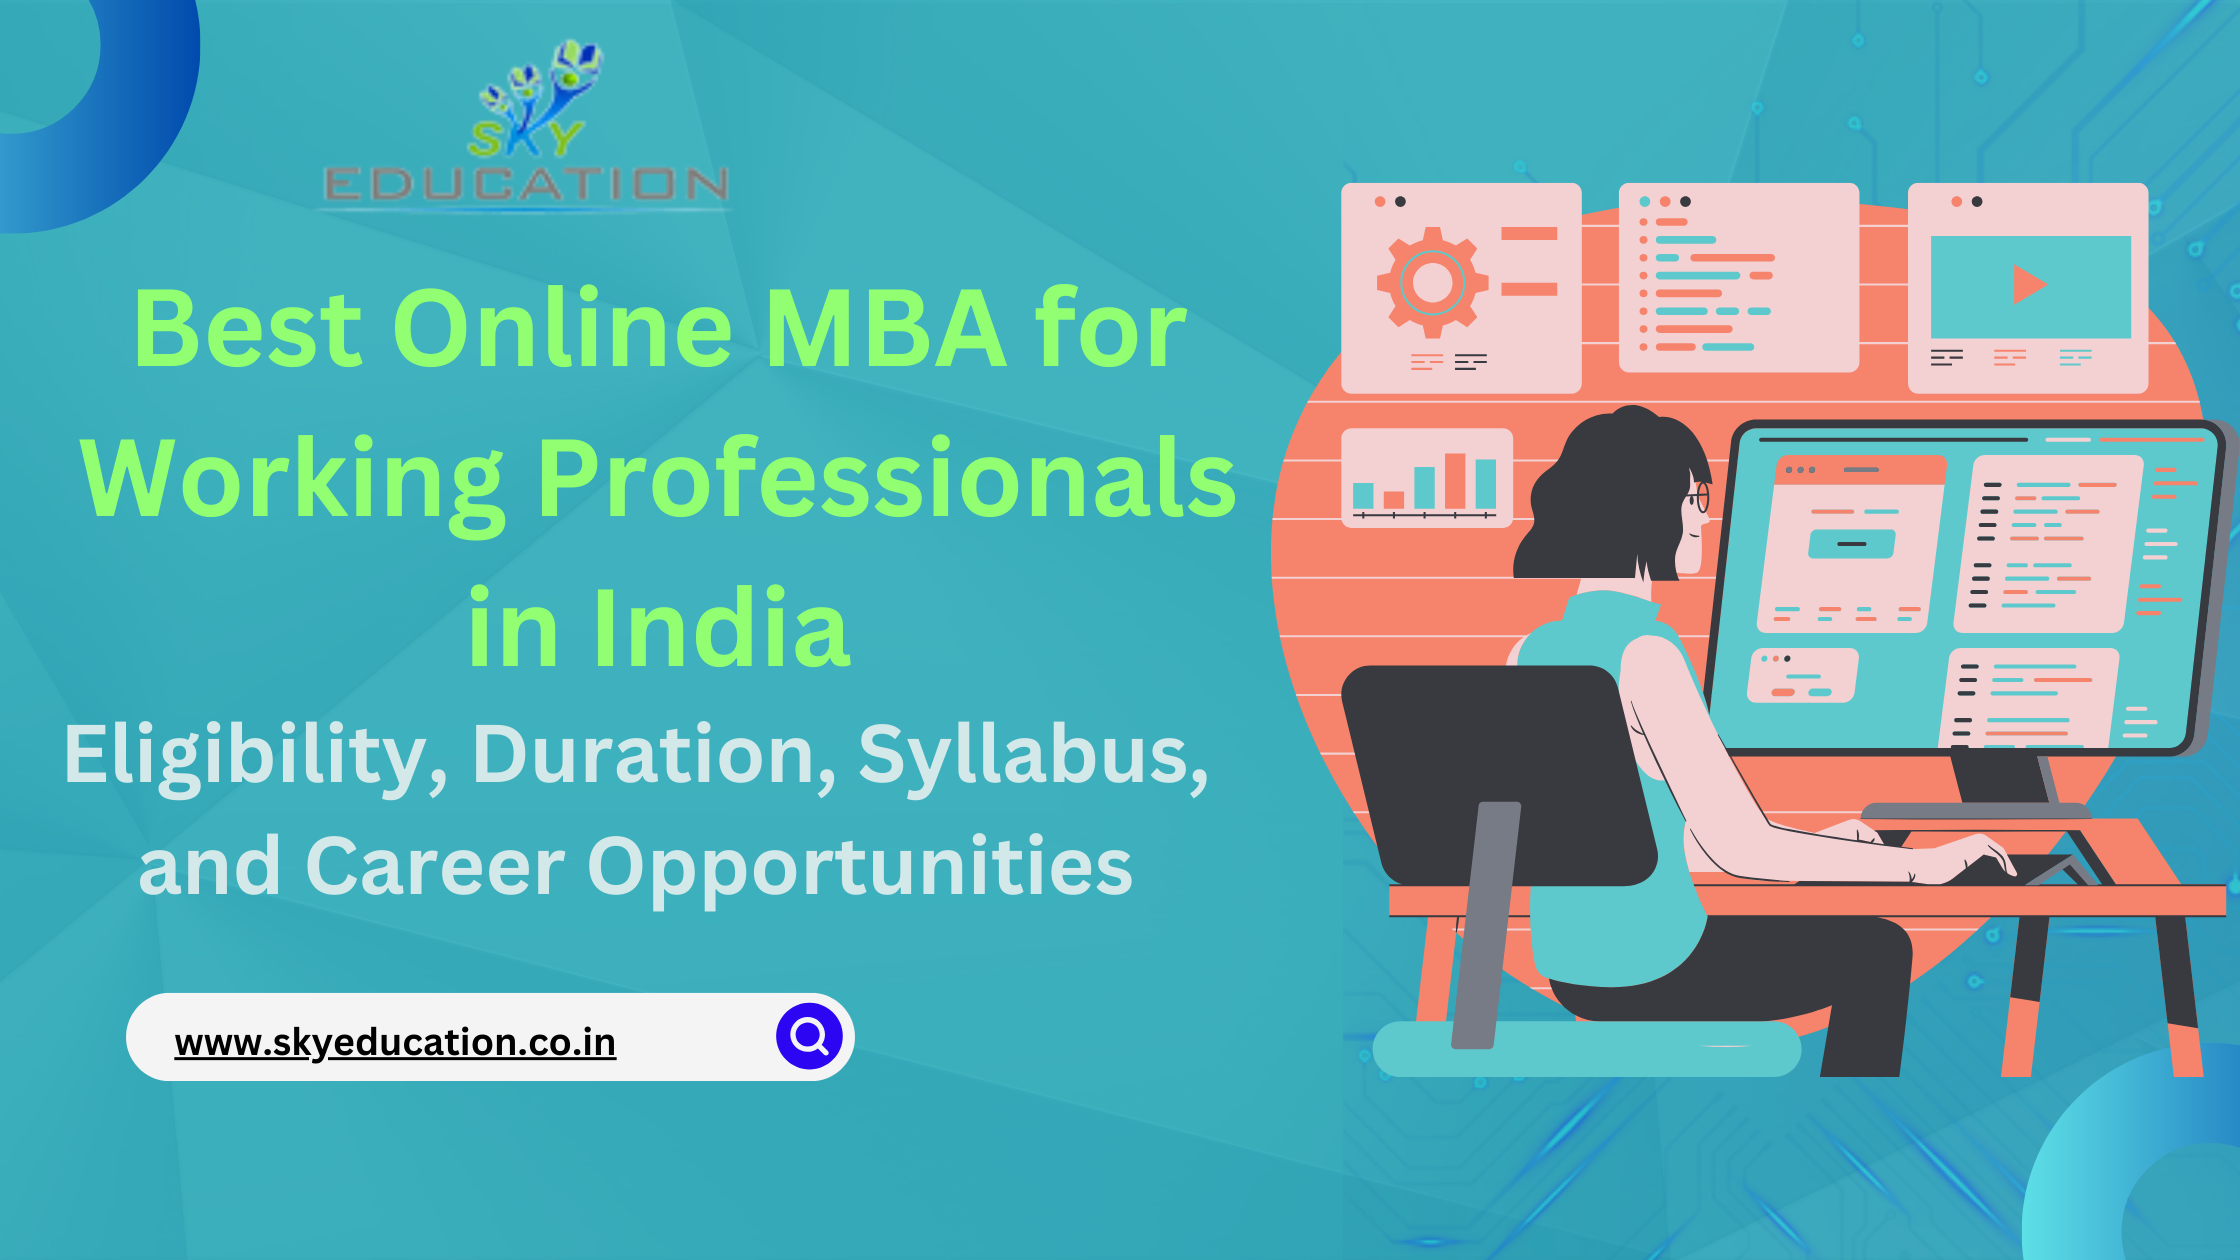 Choosing the Best Online MBA for Working Professionals in India